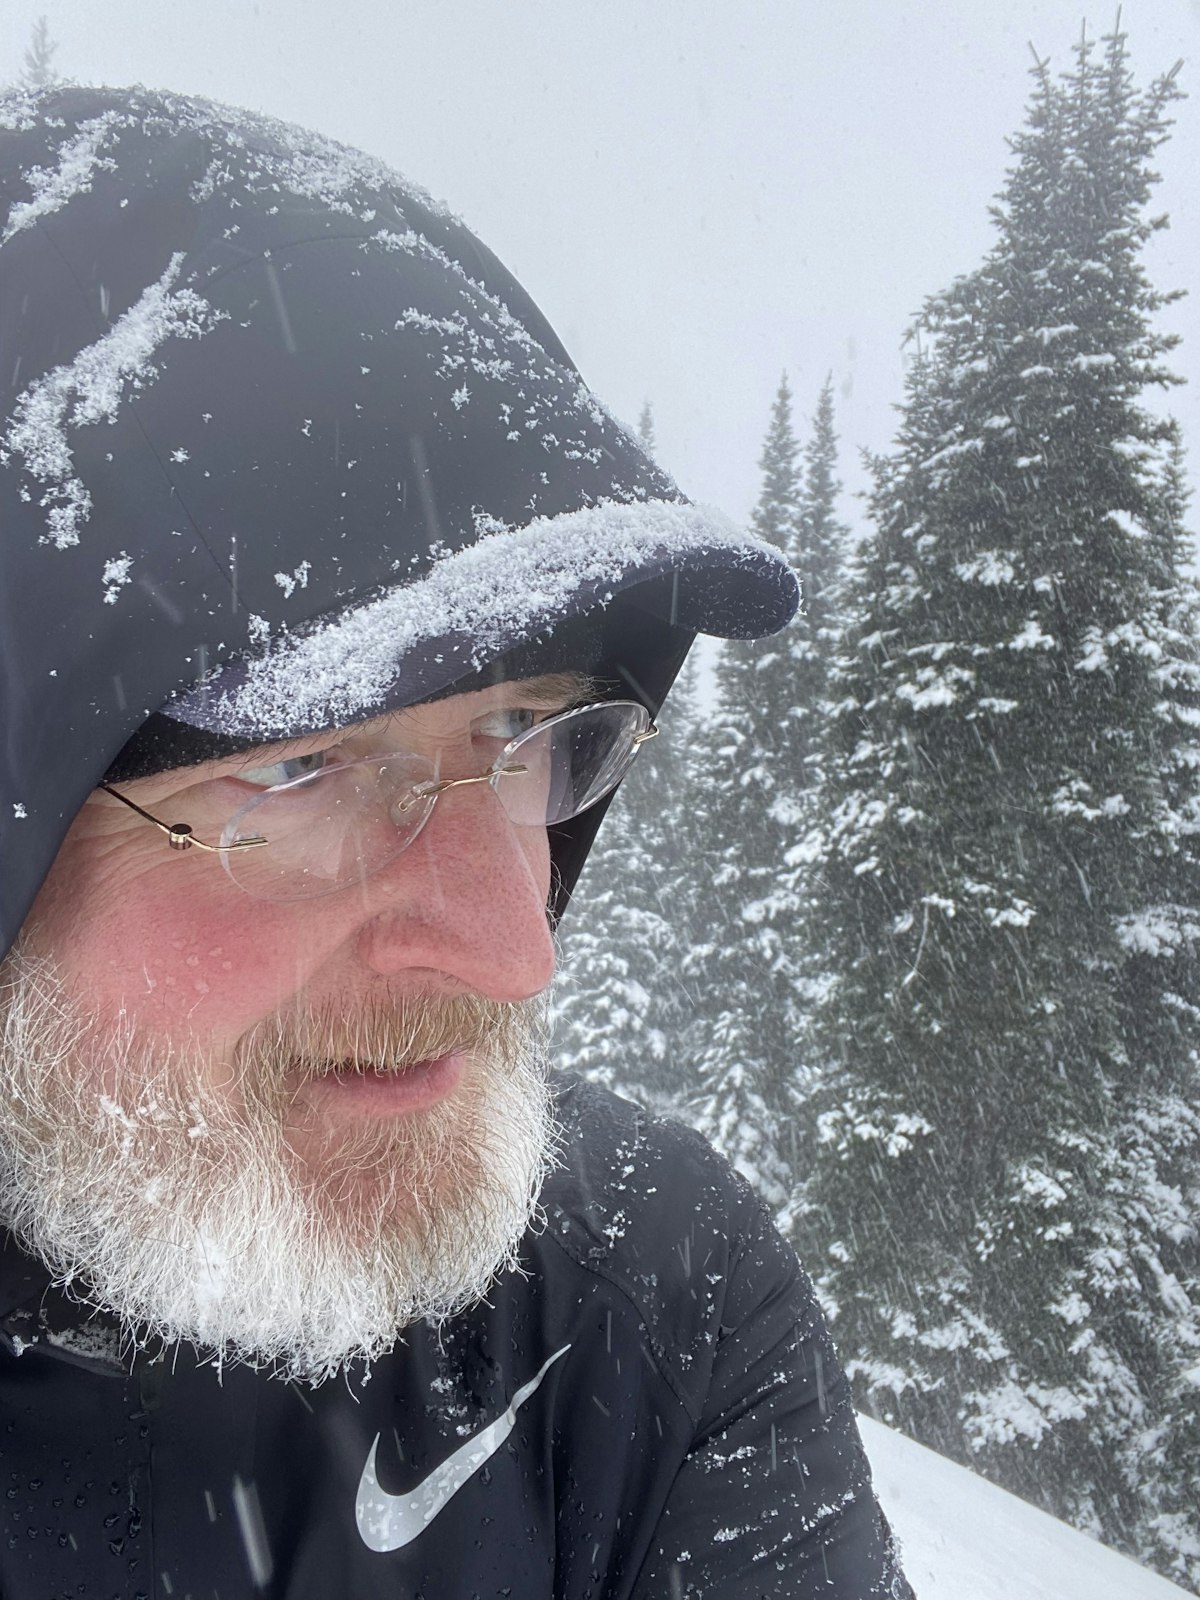 Archbishop Russell hikes Hurricane Ridge in Olympic National Park in Washington state on May 8, 2022, in whiteout conditions.